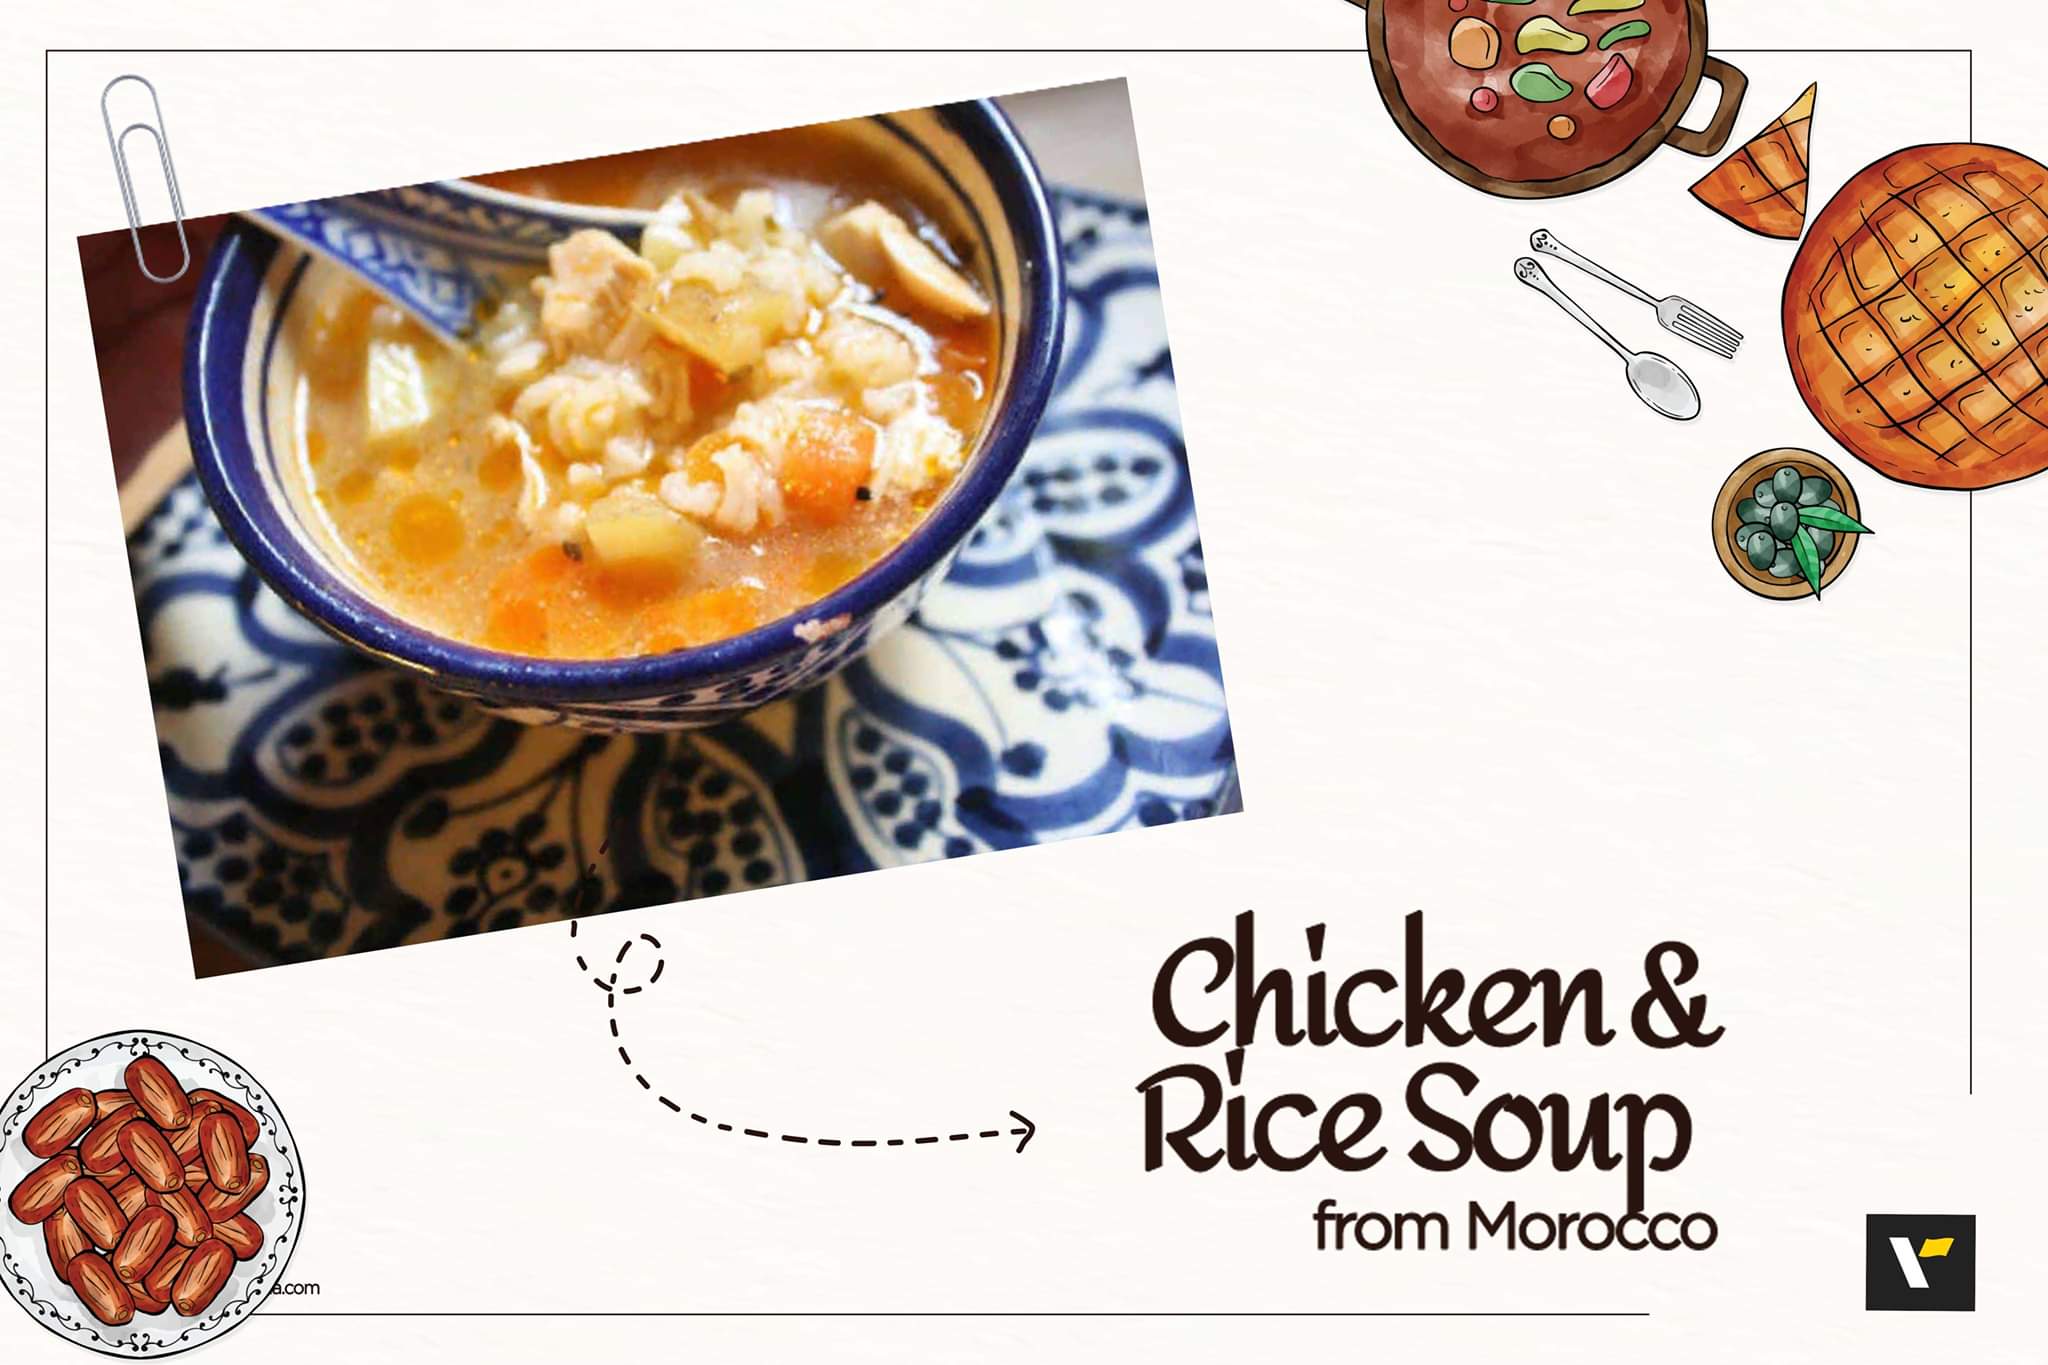 Chicken and Rice Soup from Morocco